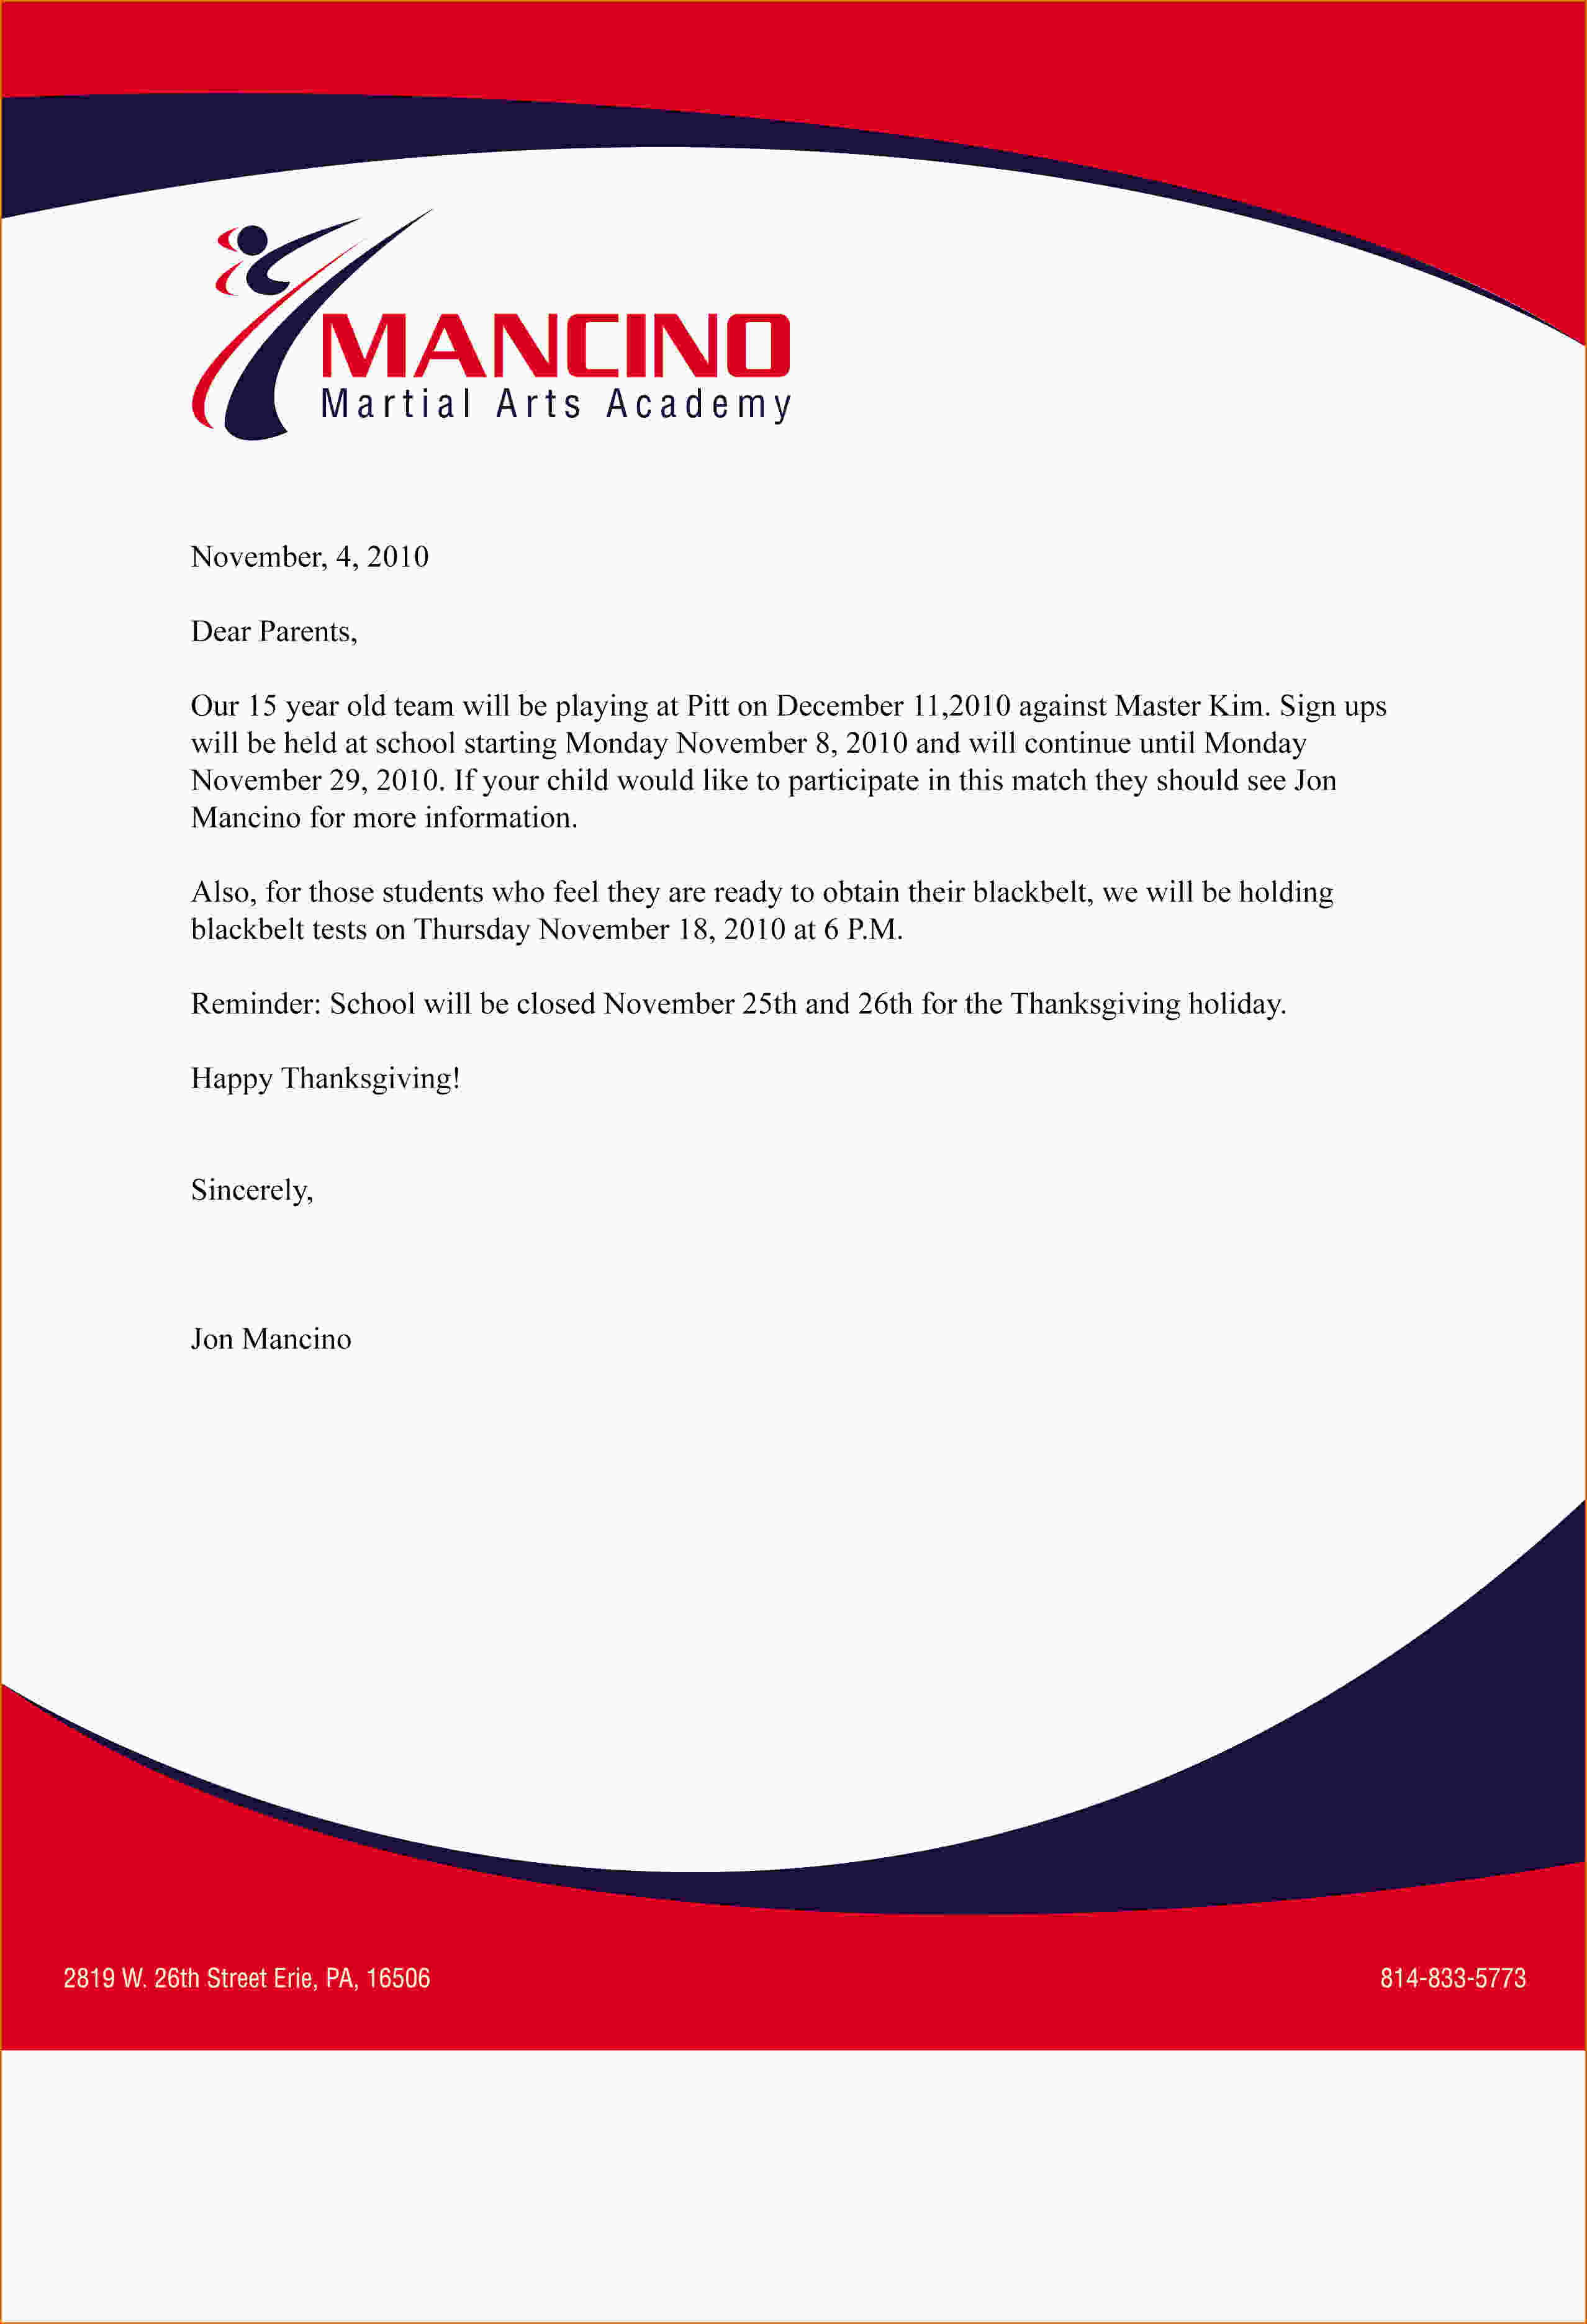 Examples Of Letterheads For Business Letters | scrumps